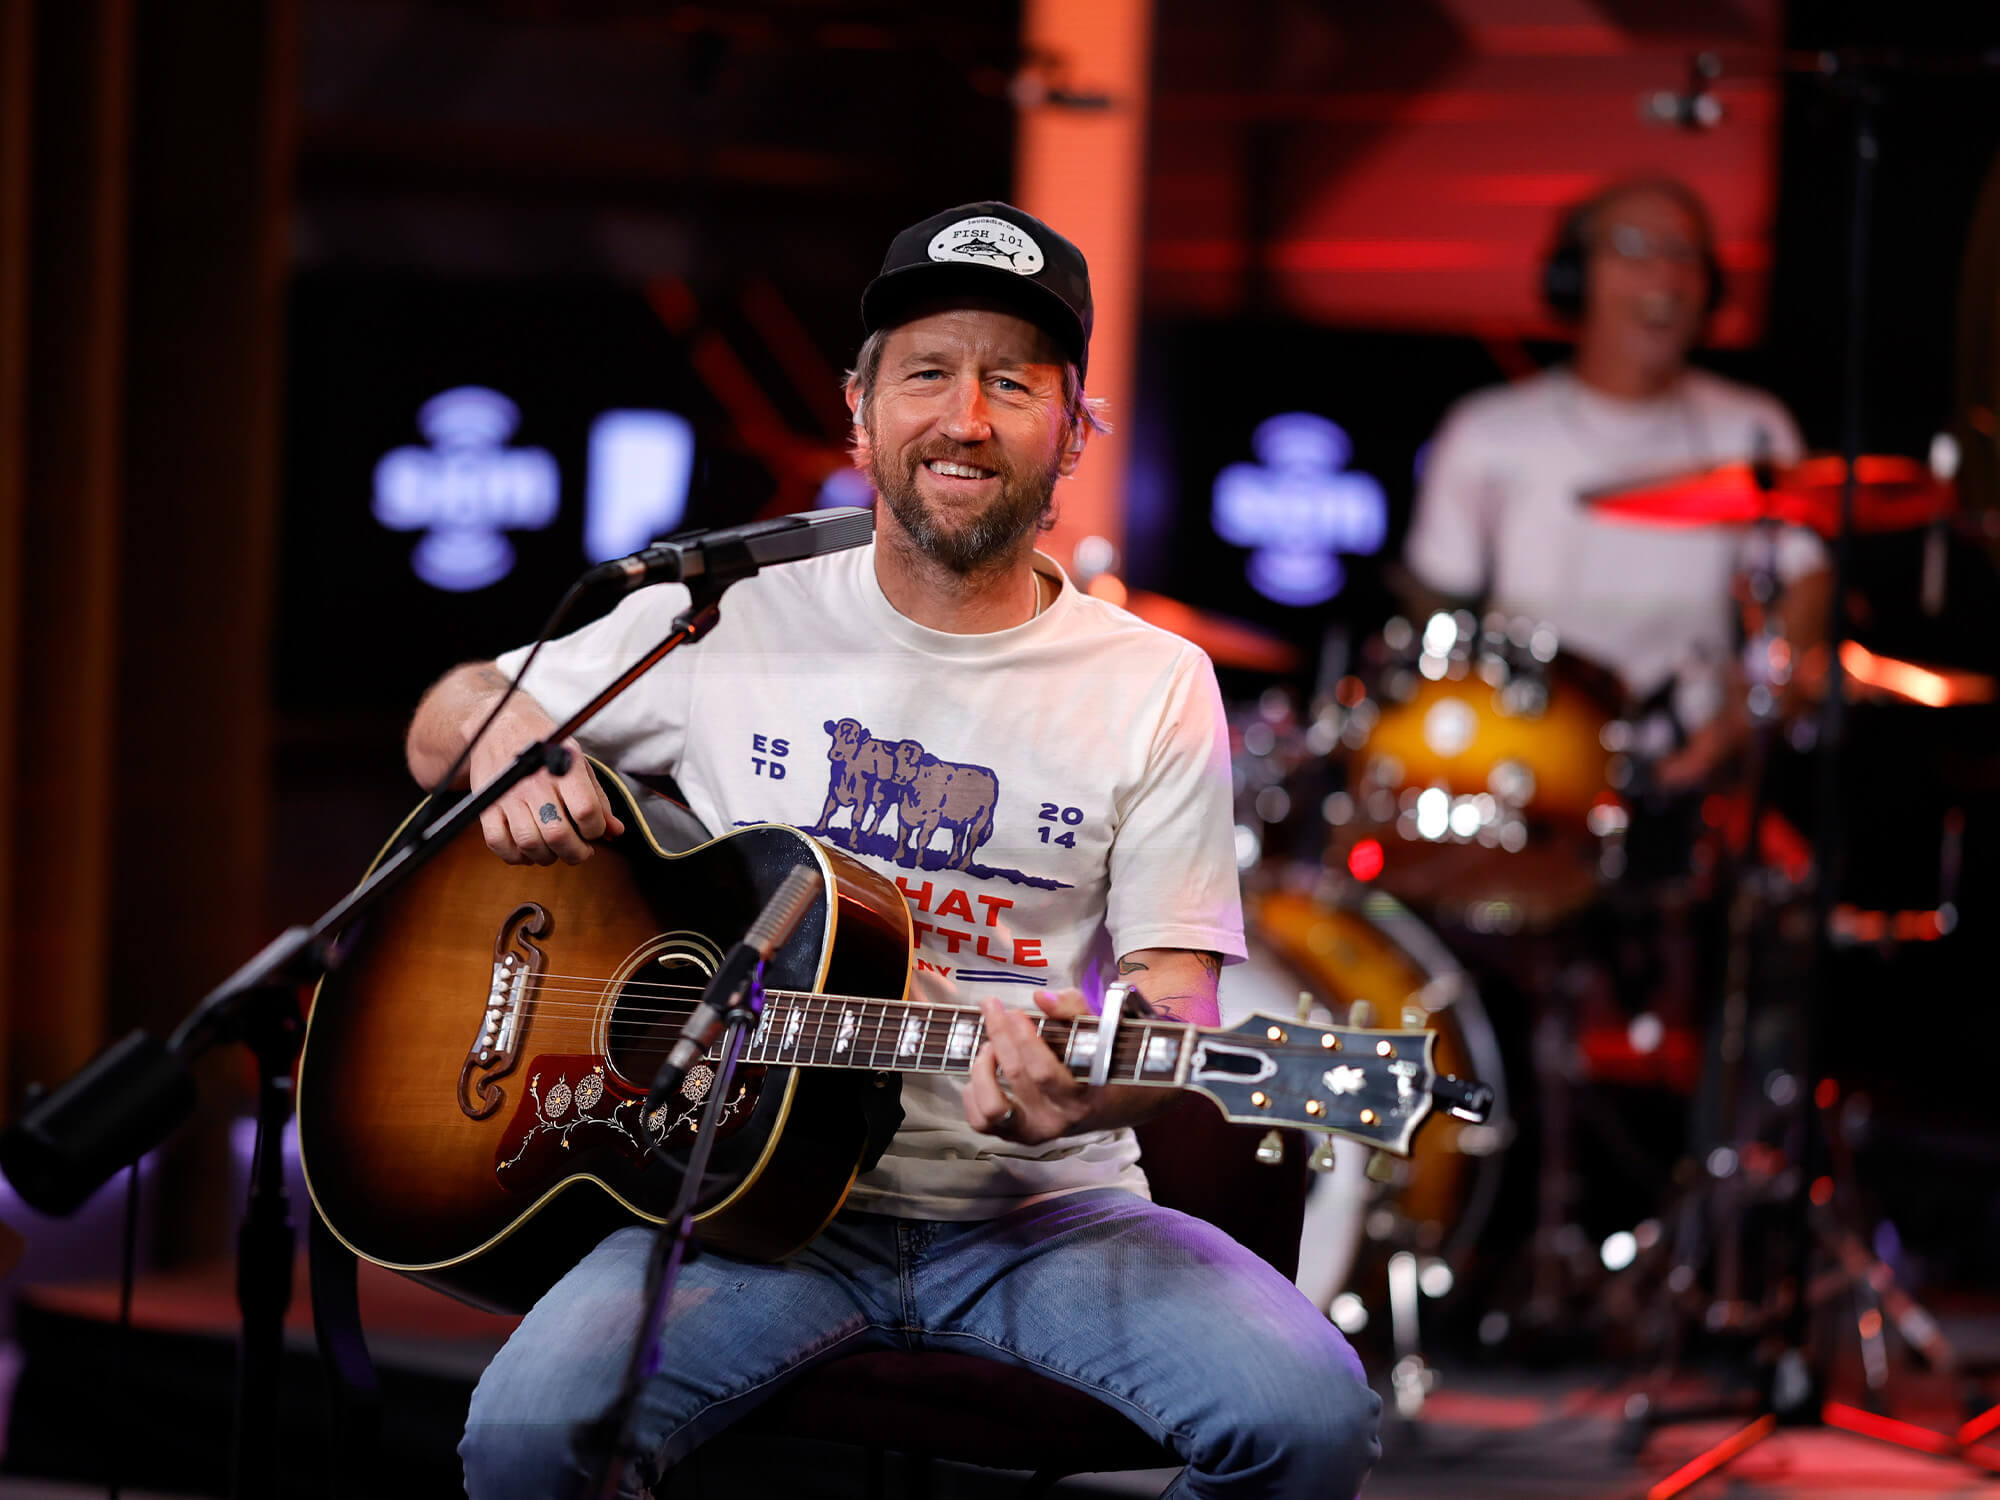 Chris Shiflett smiling and holding an acoustic Gibson guitar